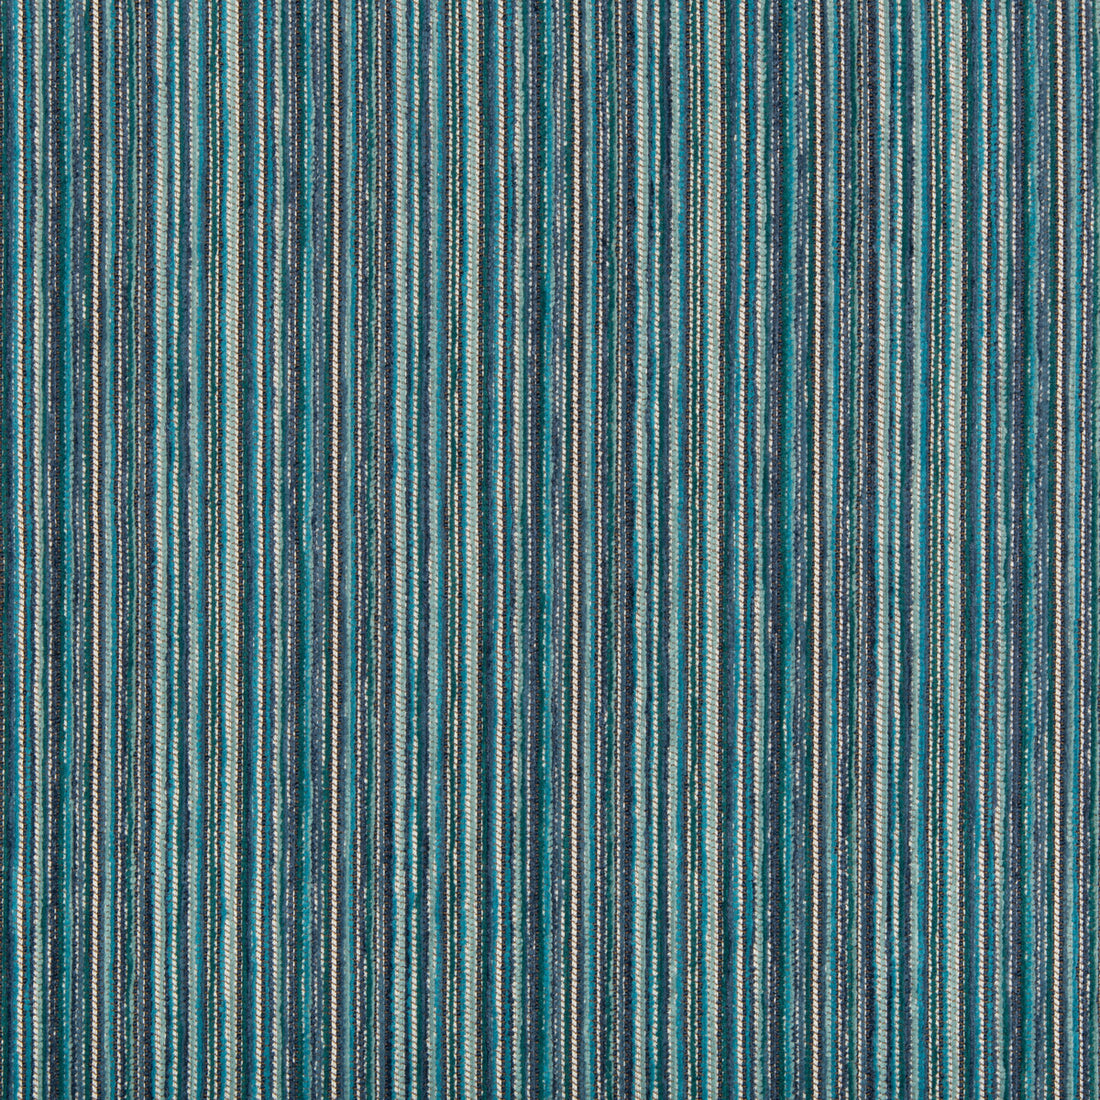 Kravet Contract fabric in 34740-513 color - pattern 34740.513.0 - by Kravet Contract in the Incase Crypton Gis collection